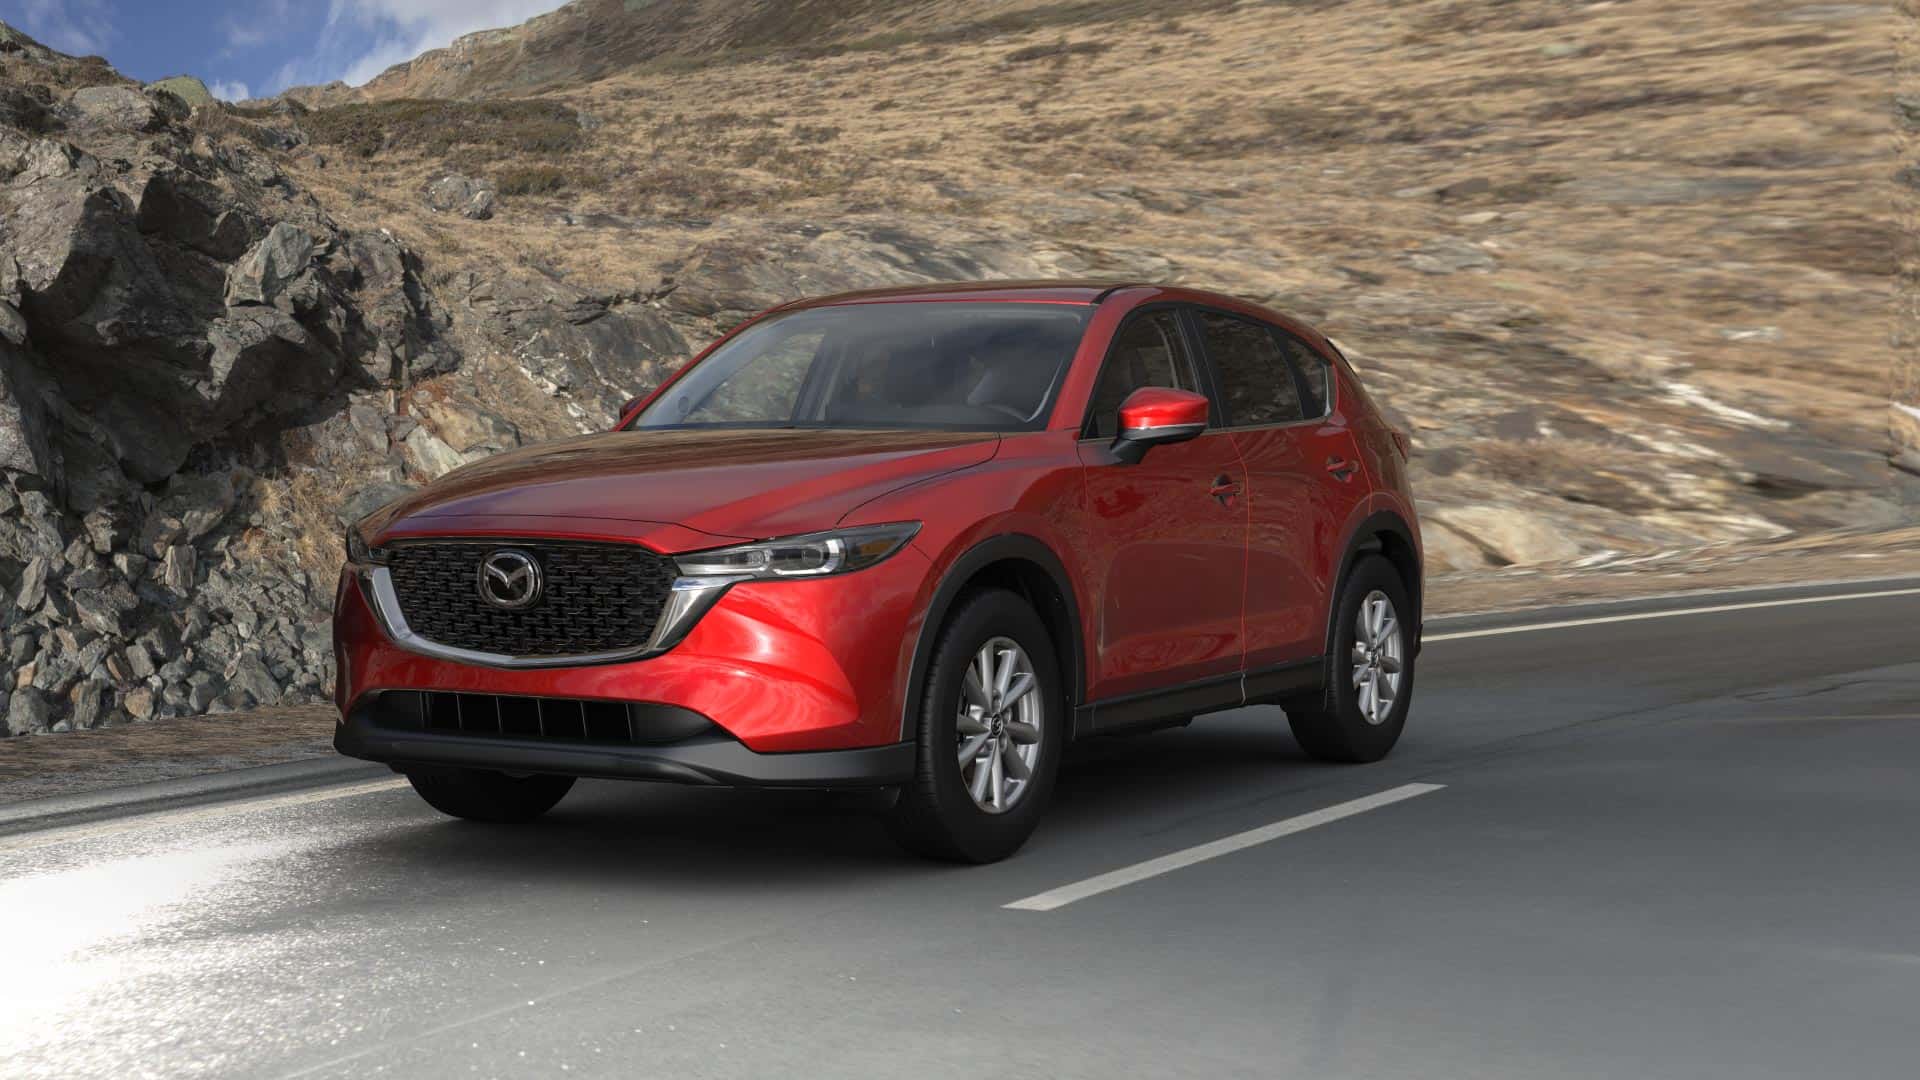 2023 Mazda CX-5 2.5 S Select Soul Red Crystal Metallic | Neil Huffman Mazda in Louisville KY